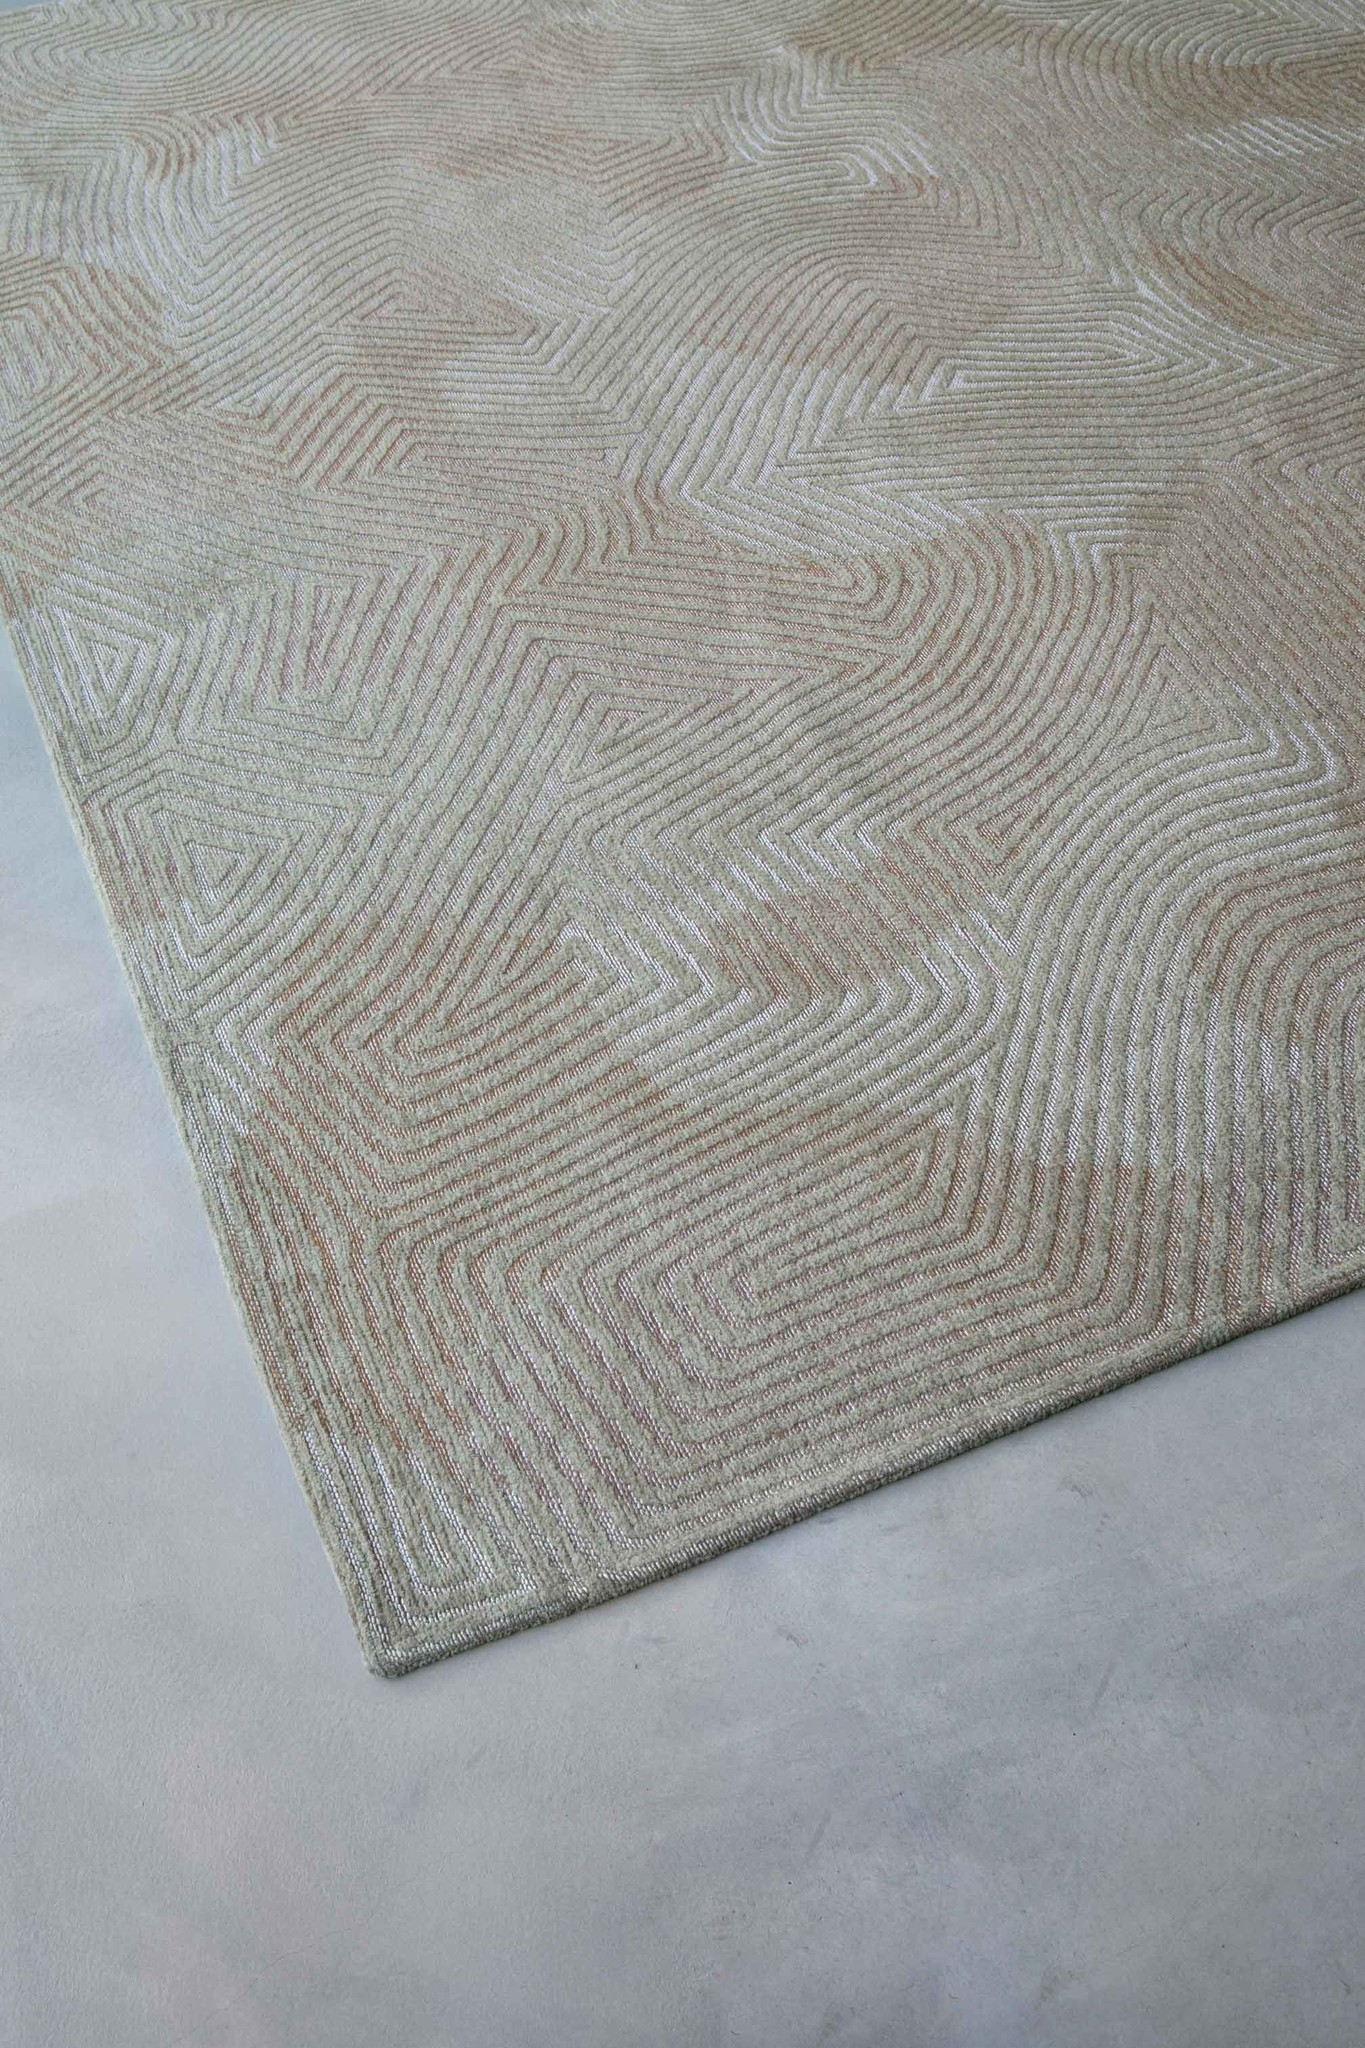 Coral - Shell Beige 9229 ☞ Size: 200 x 280 cm